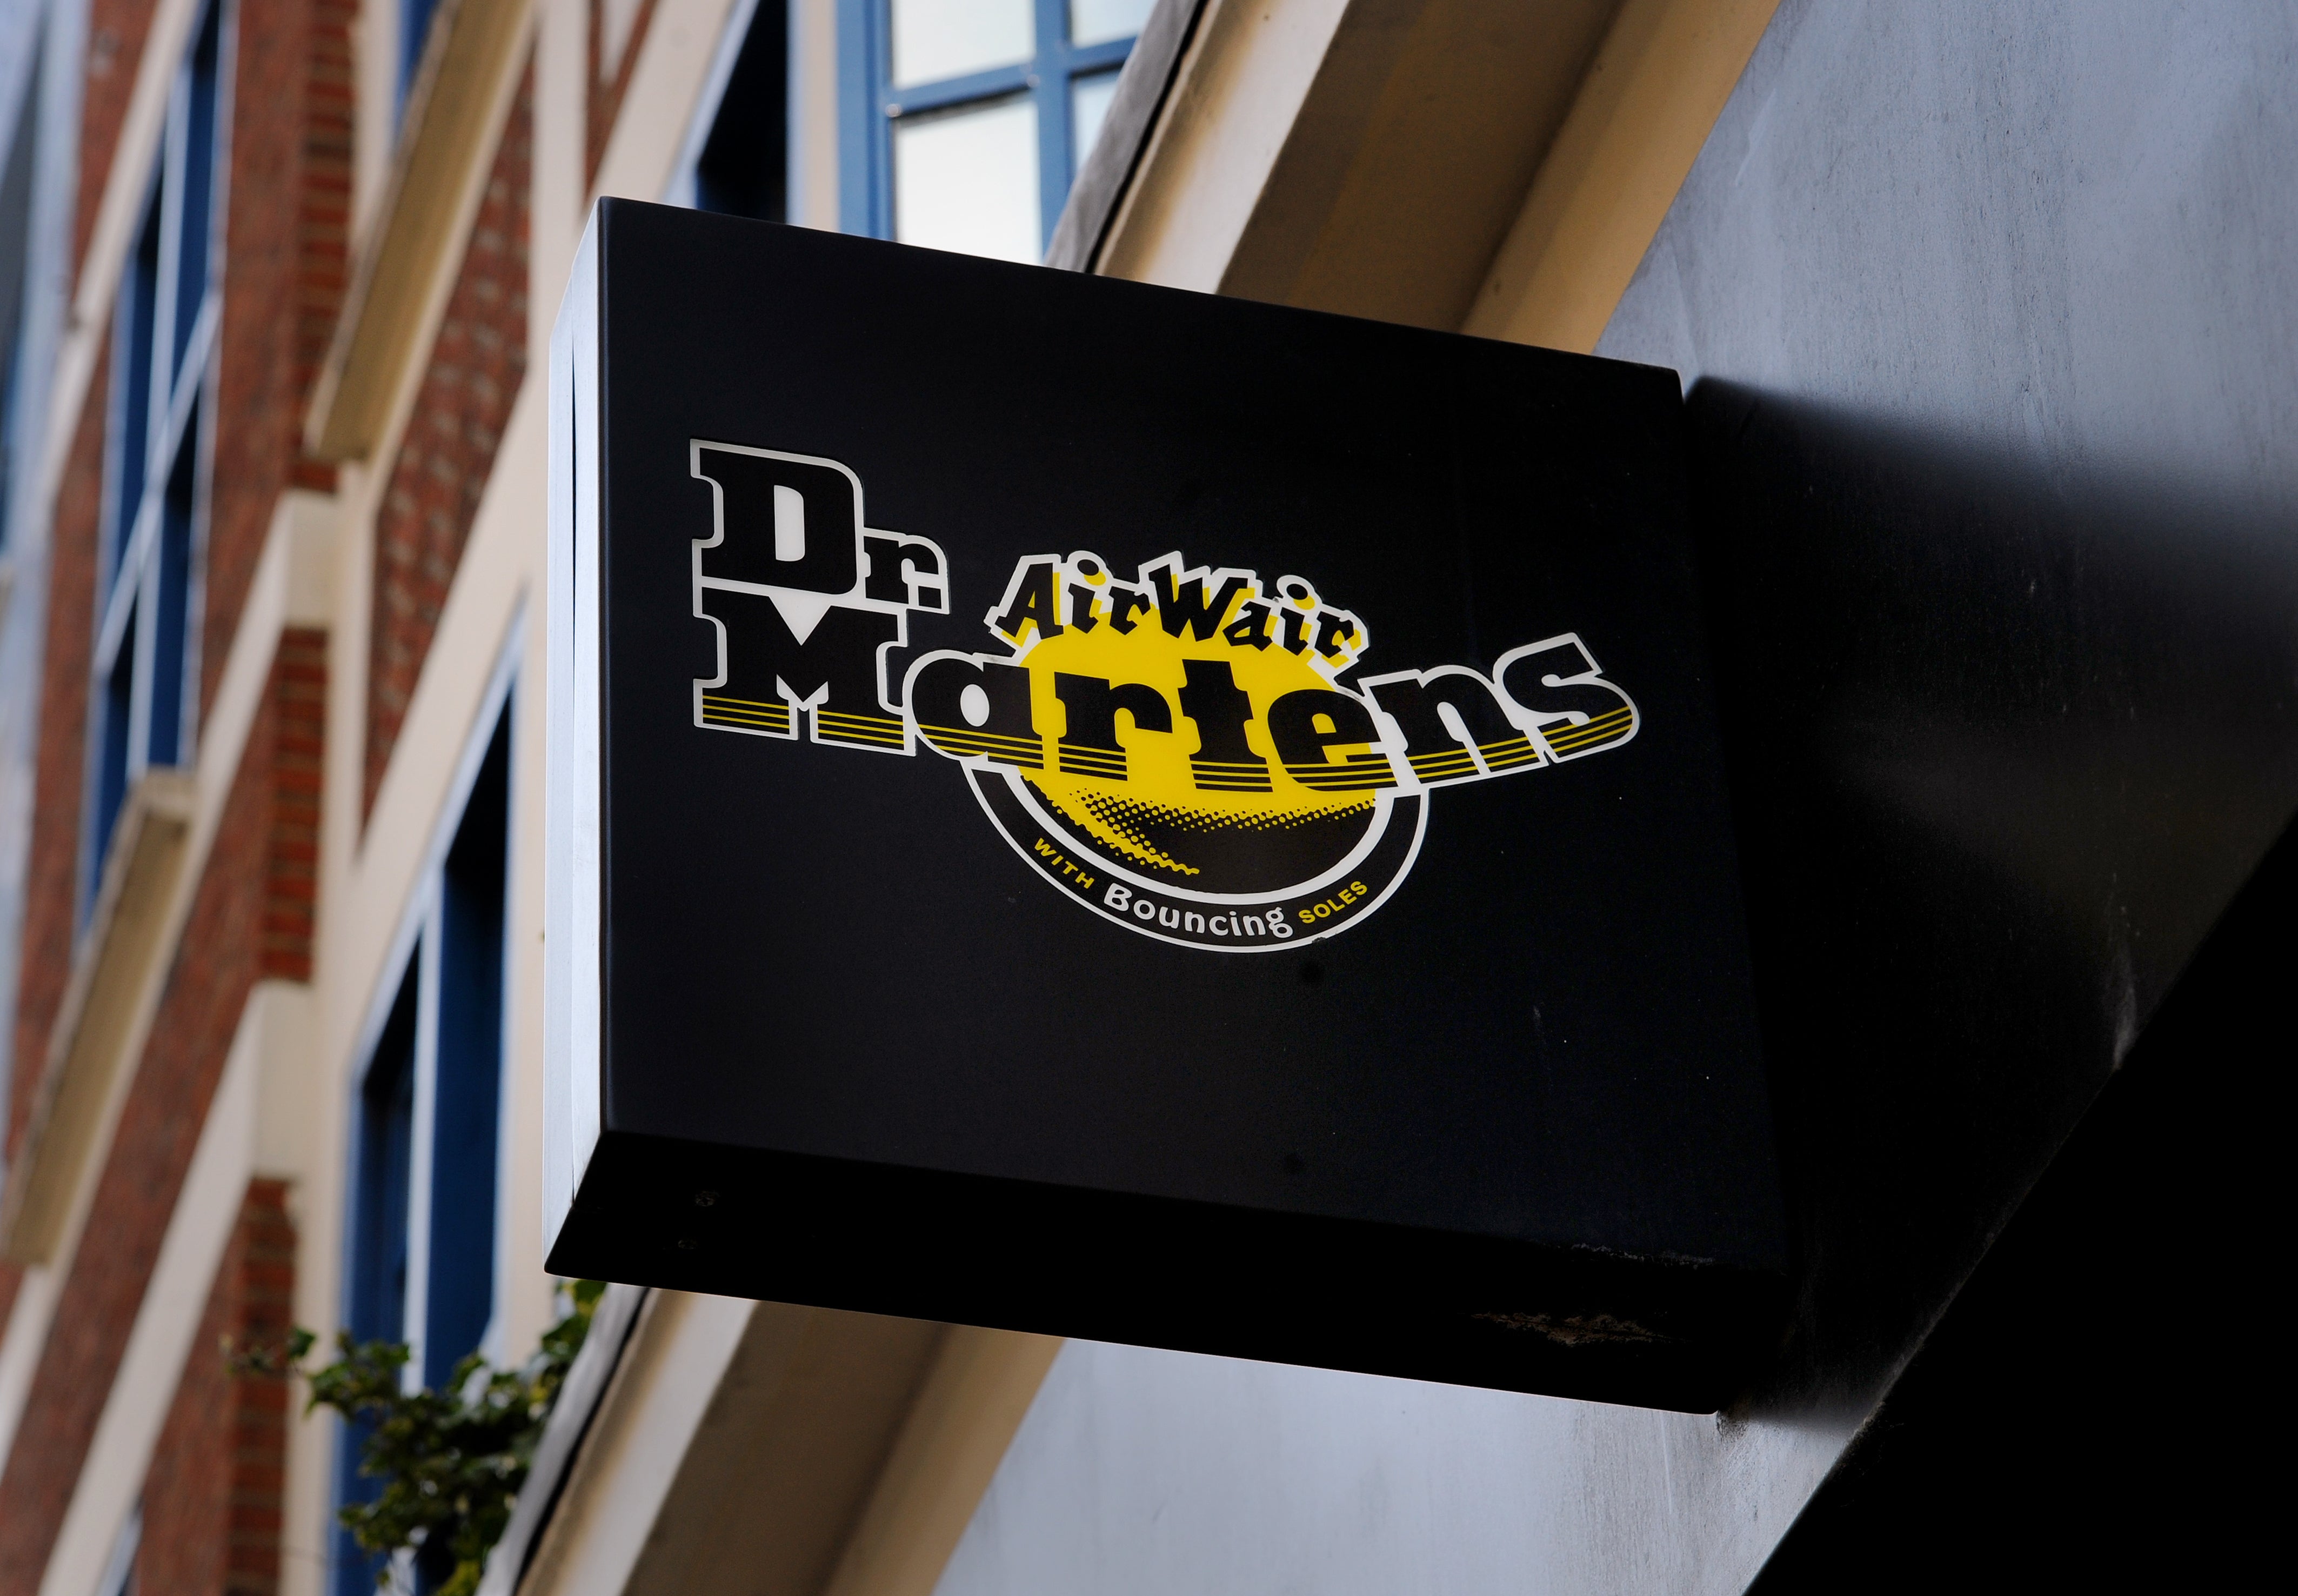 General view of a Dr Martens sign on the front of their shop in London The retailer saw shares slide after it posted a slowdown in sales over the latest quarter (Lauren Hurley/PA)